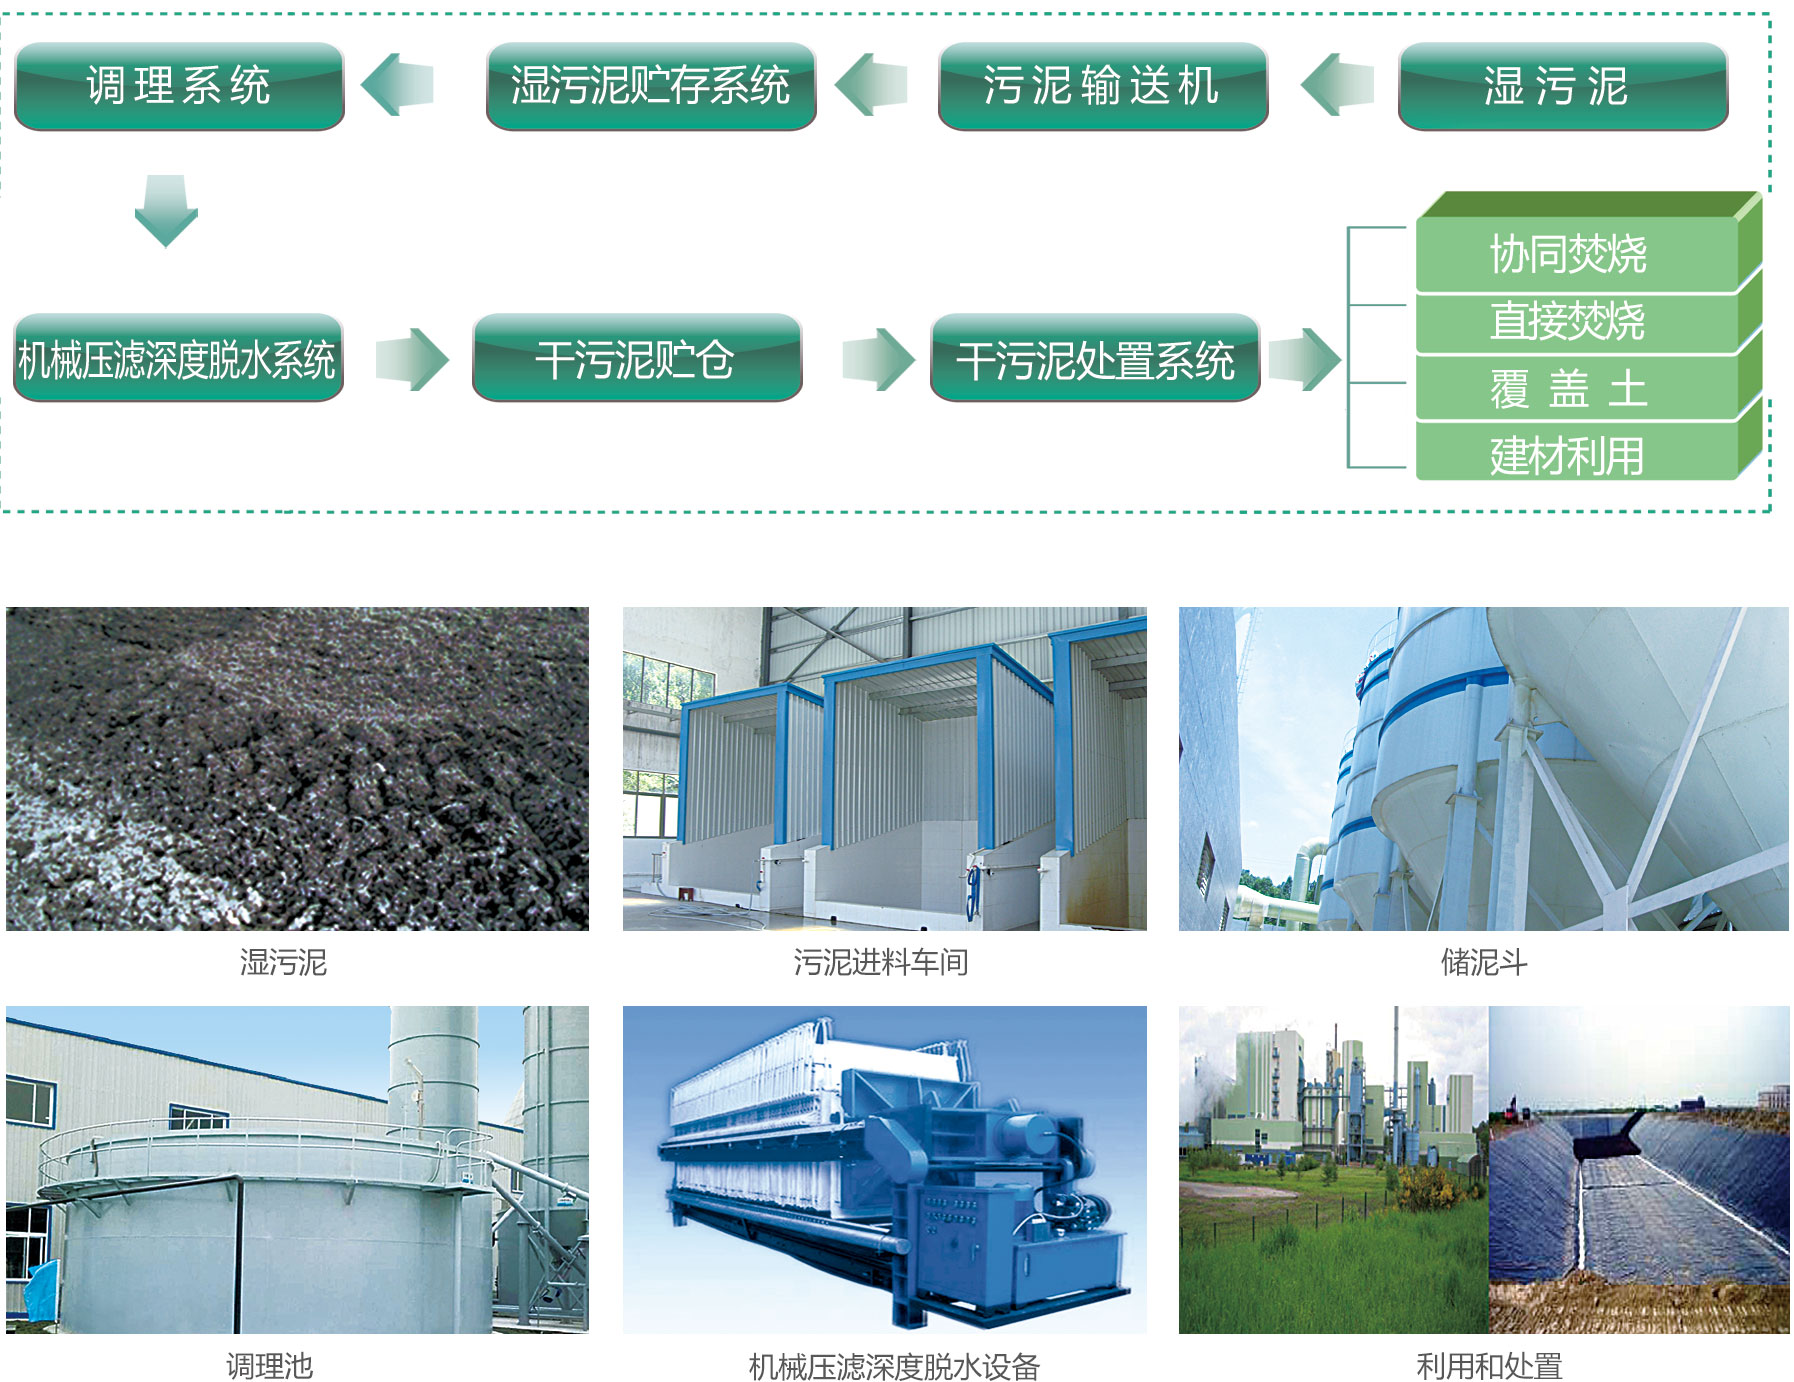 Modified conditioning cooperates with mechanical filter press dehydration process